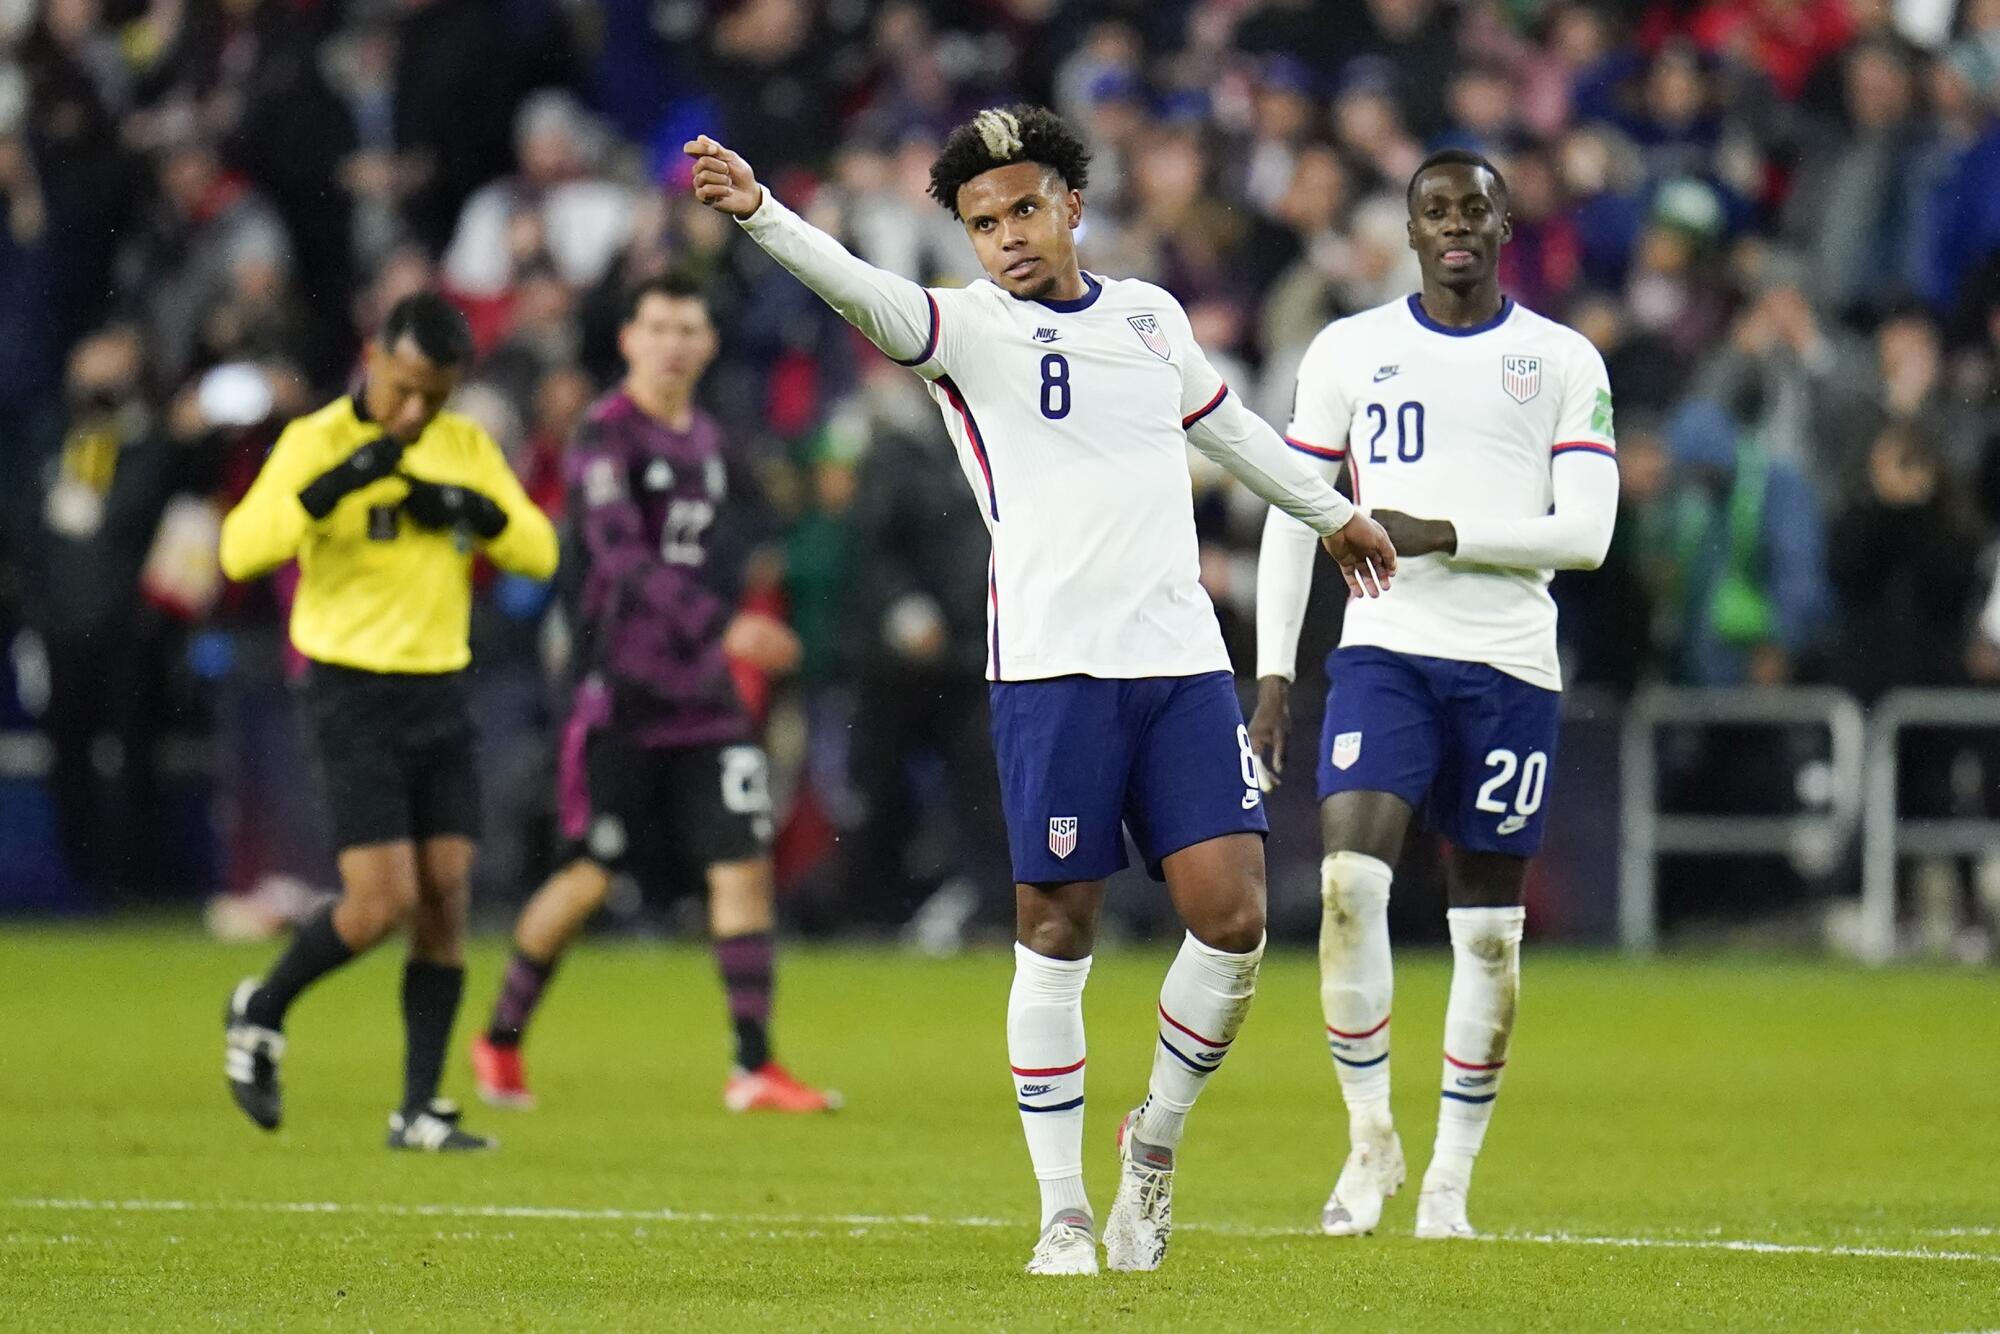 The United States' Weston McKennie reacts after scoring a goal as teammate Tim Weah looks on